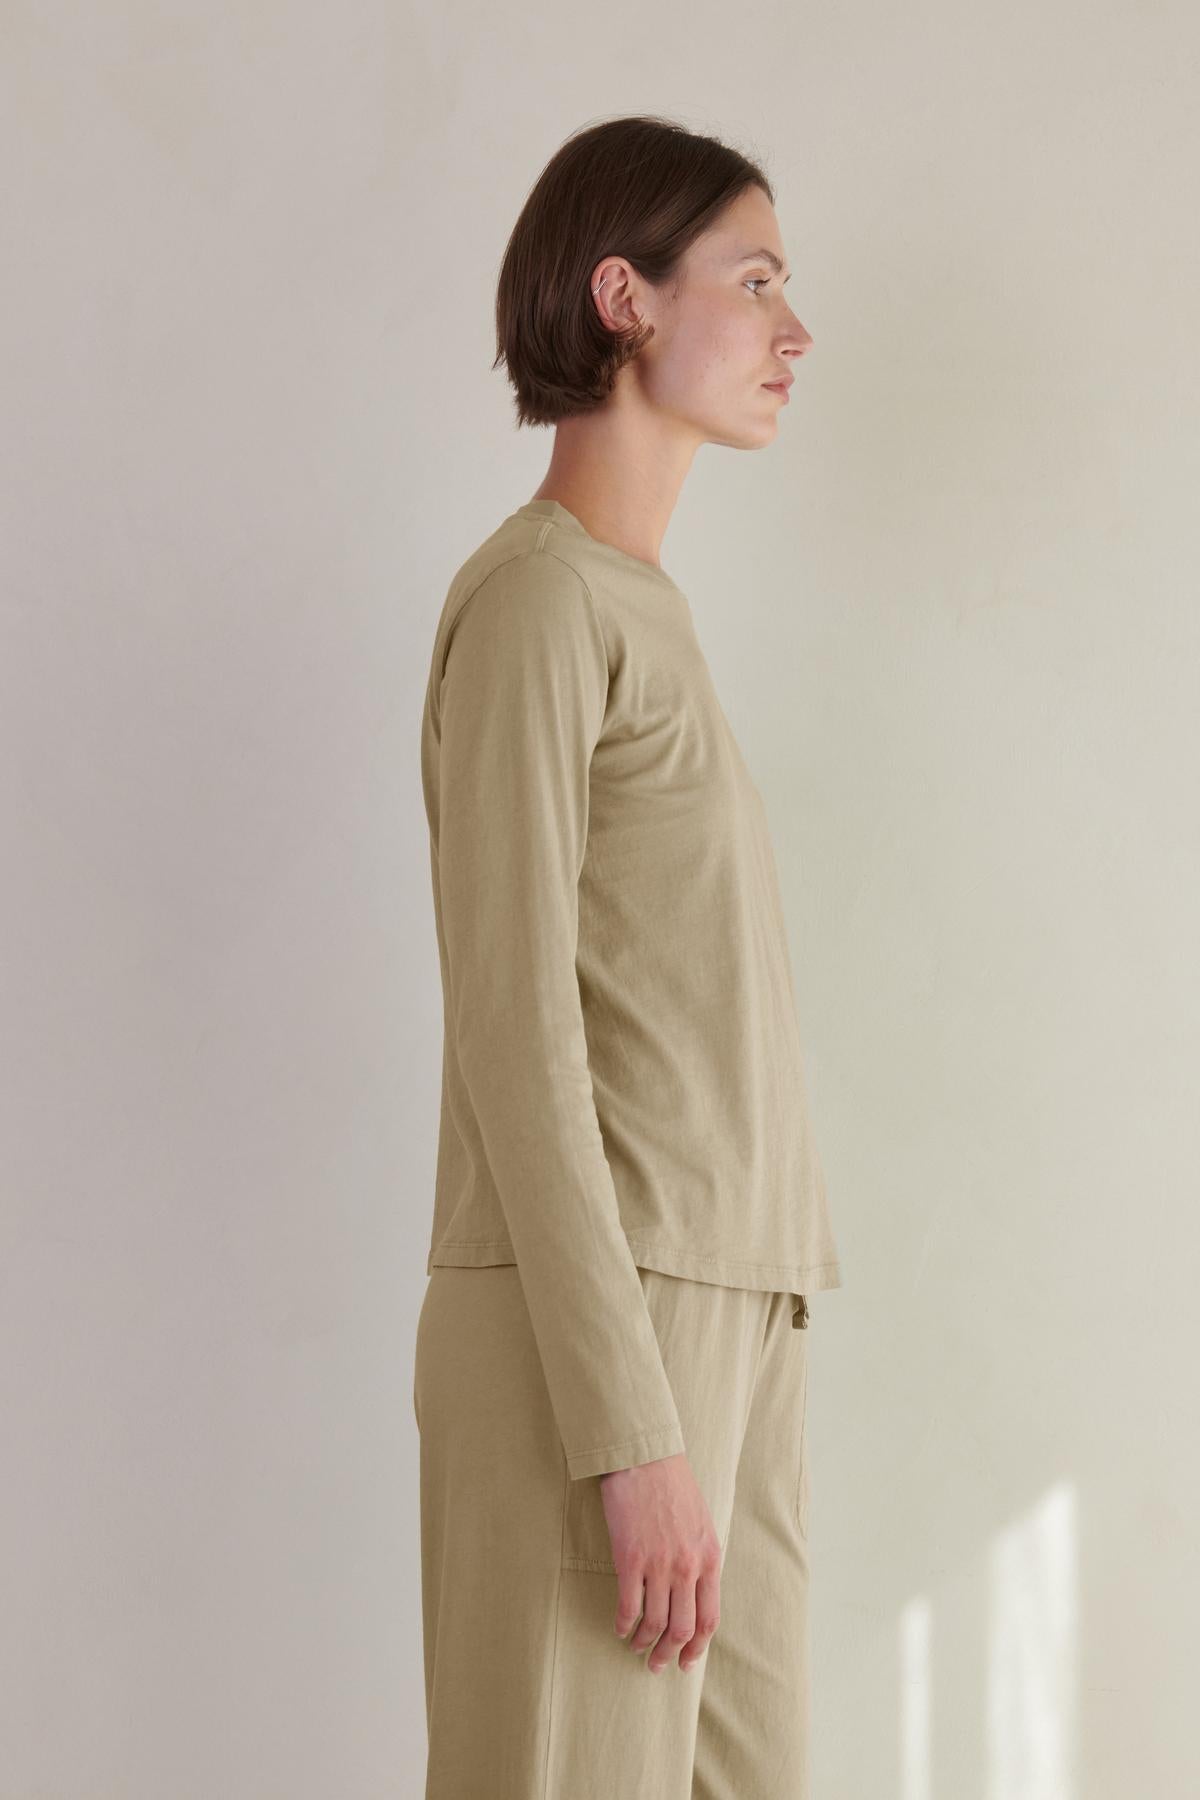   Side profile of a person wearing a Velvet by Jenny Graham VICENTE TEE and matching pants, crafted from organic cotton, against a neutral background. 